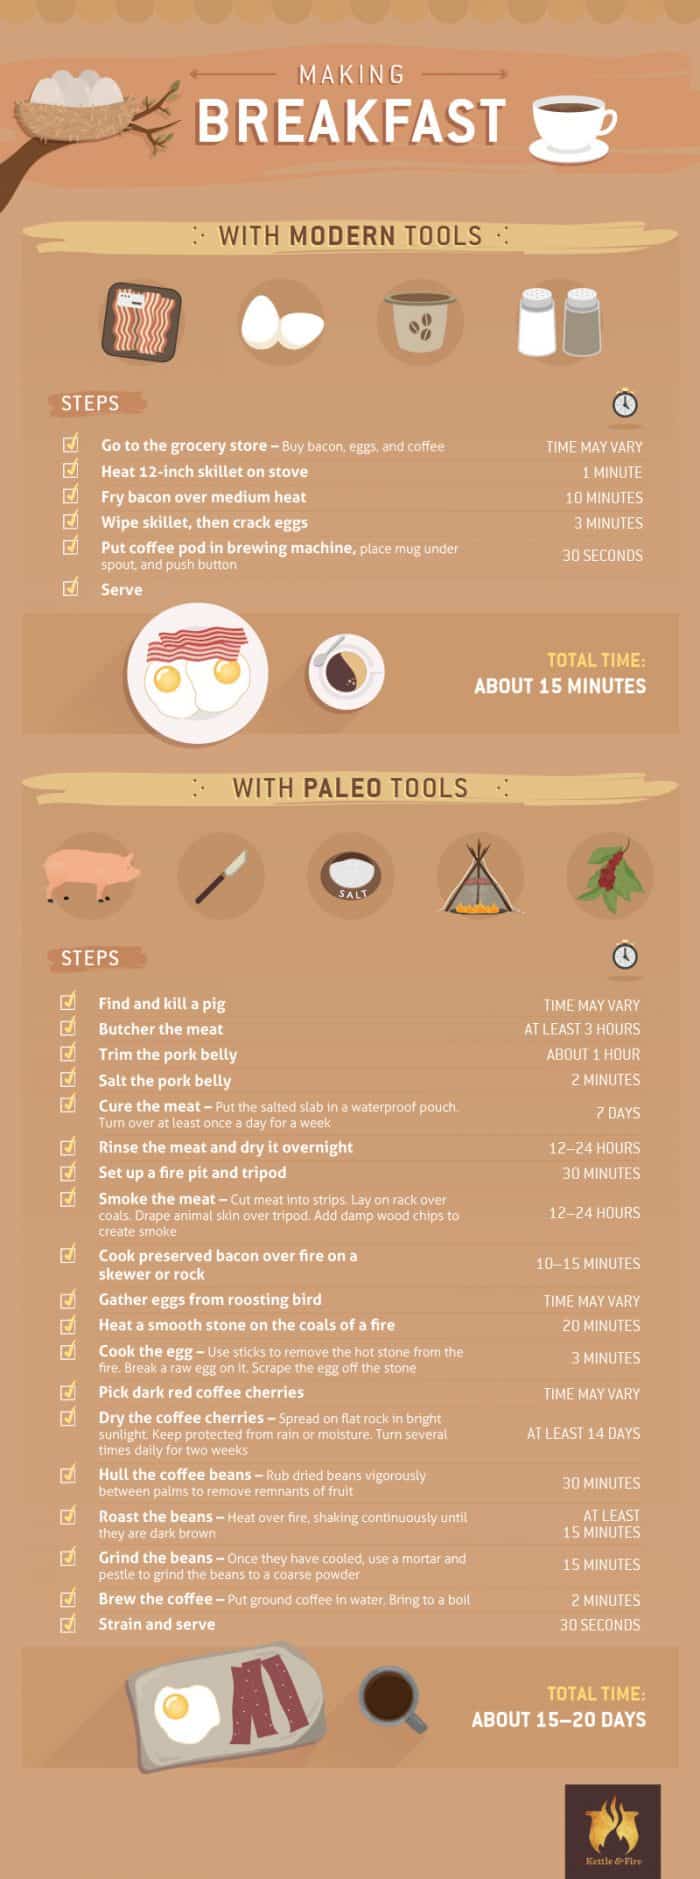 Making breakfast with modern tools infographic